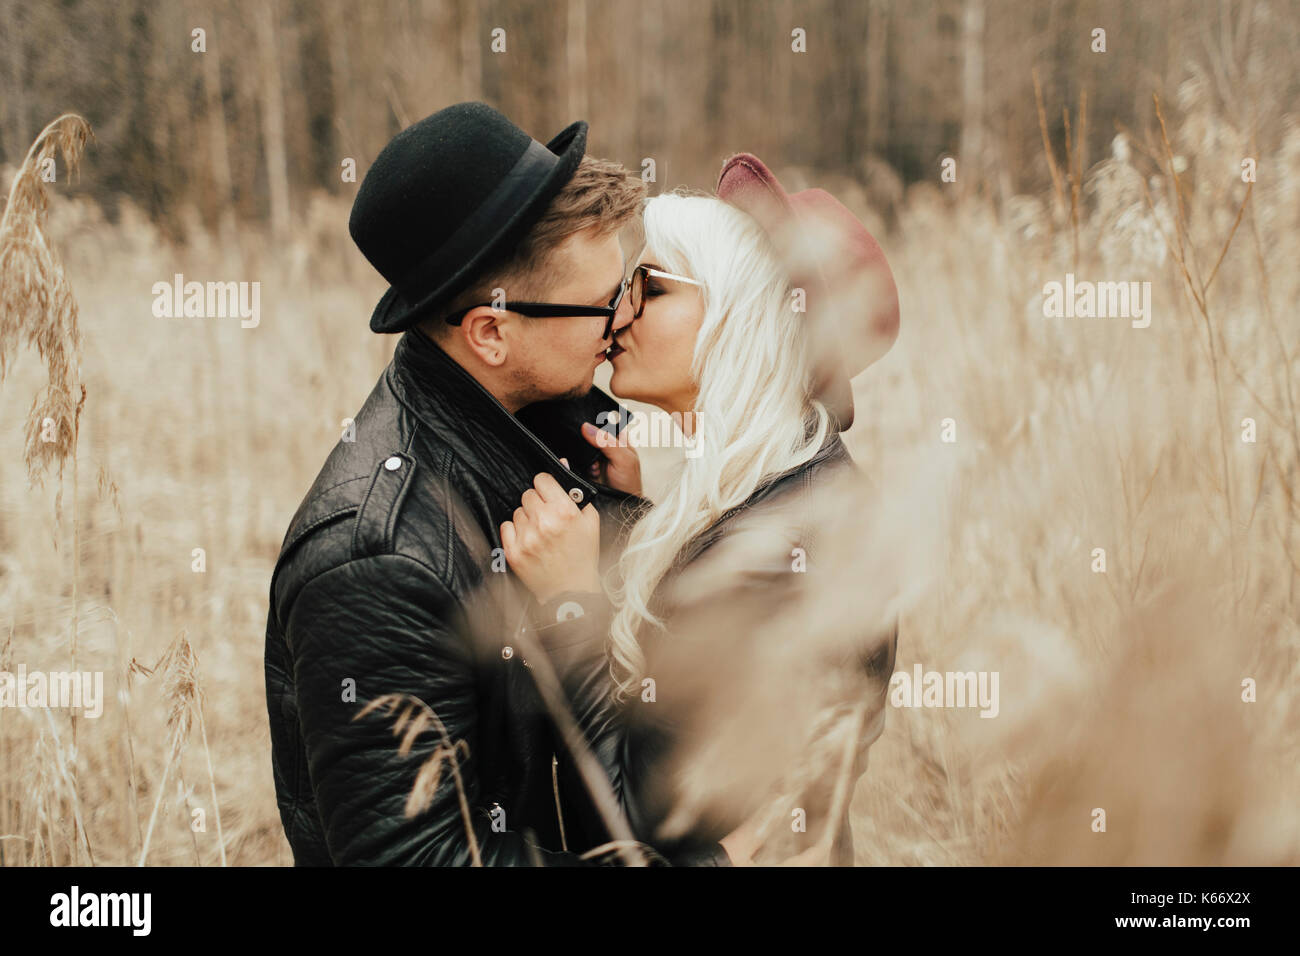 Middle Eastern couple kissing in field Stock Photo